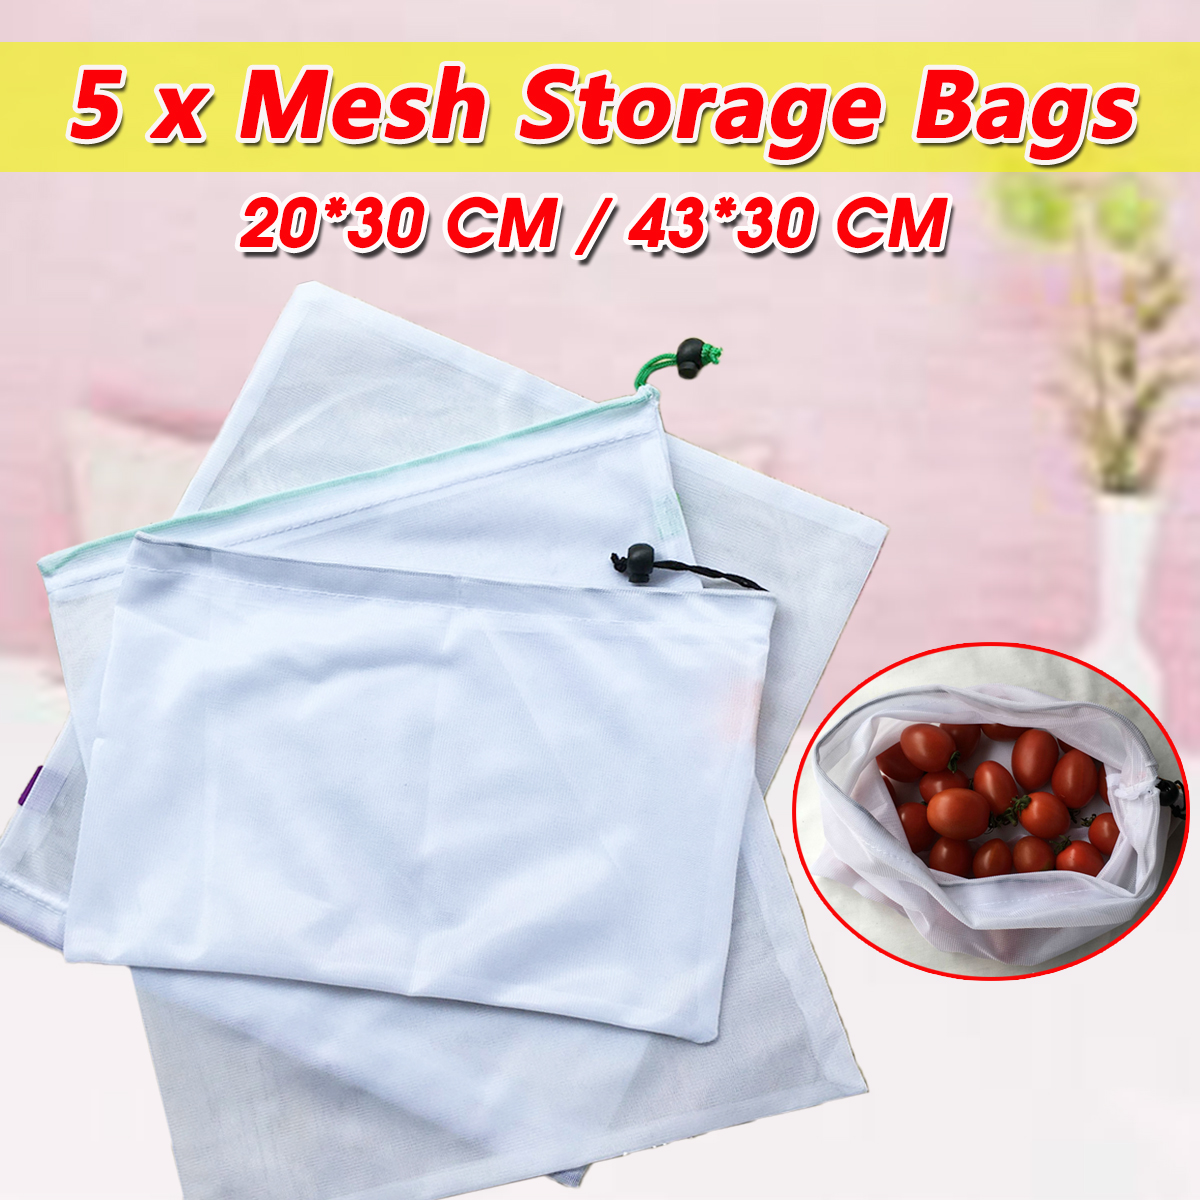 Garden-Hanging-Bags-Flower-Container-with-Handles-Mesh-Storage-for-Fruit-Vegetables-1673314-1